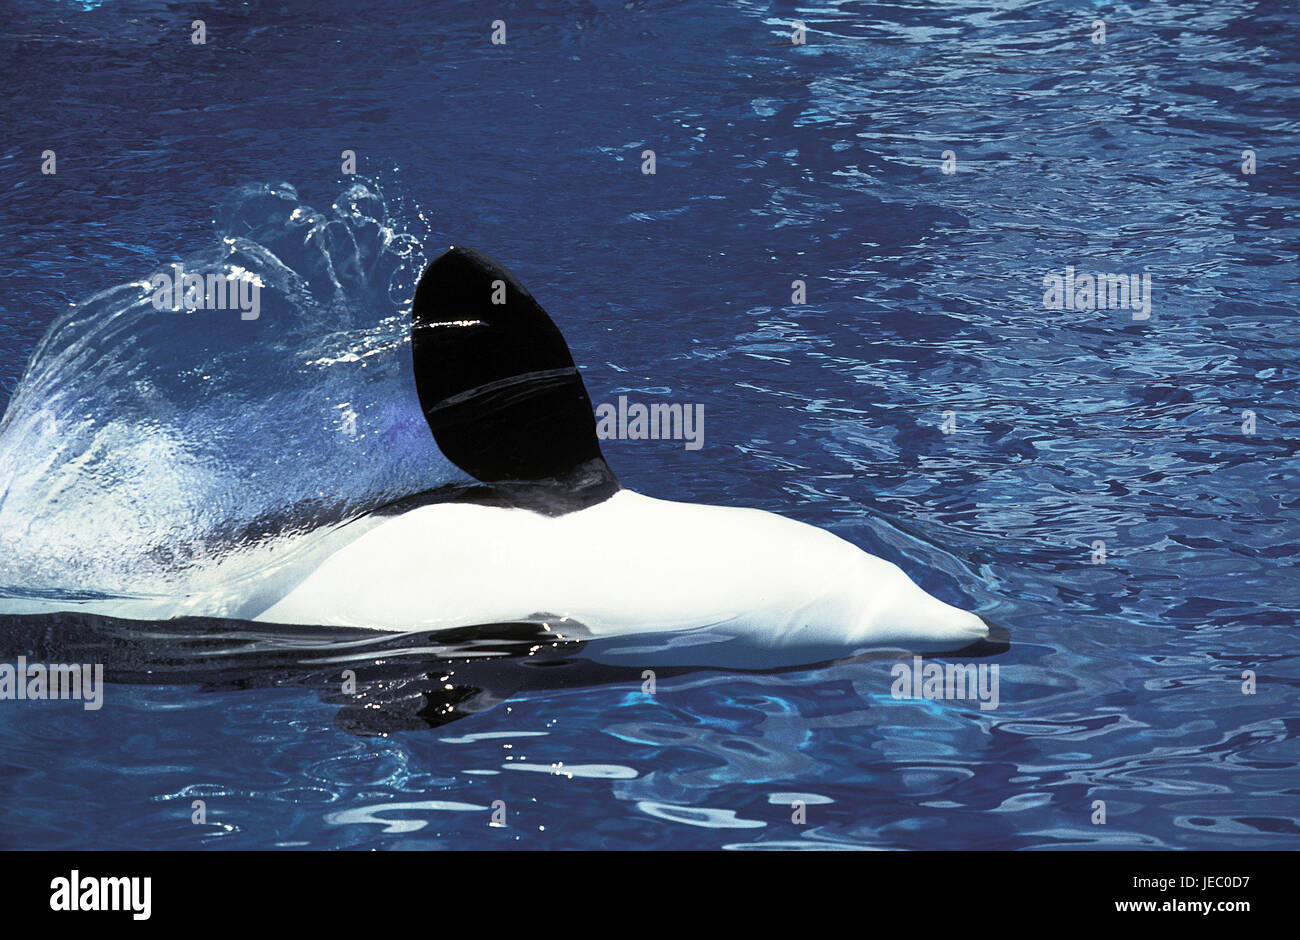 Big killer whale, Orcinus orca, also Orca, murderer's whale, killer whale, adult animal, fin, Stock Photo